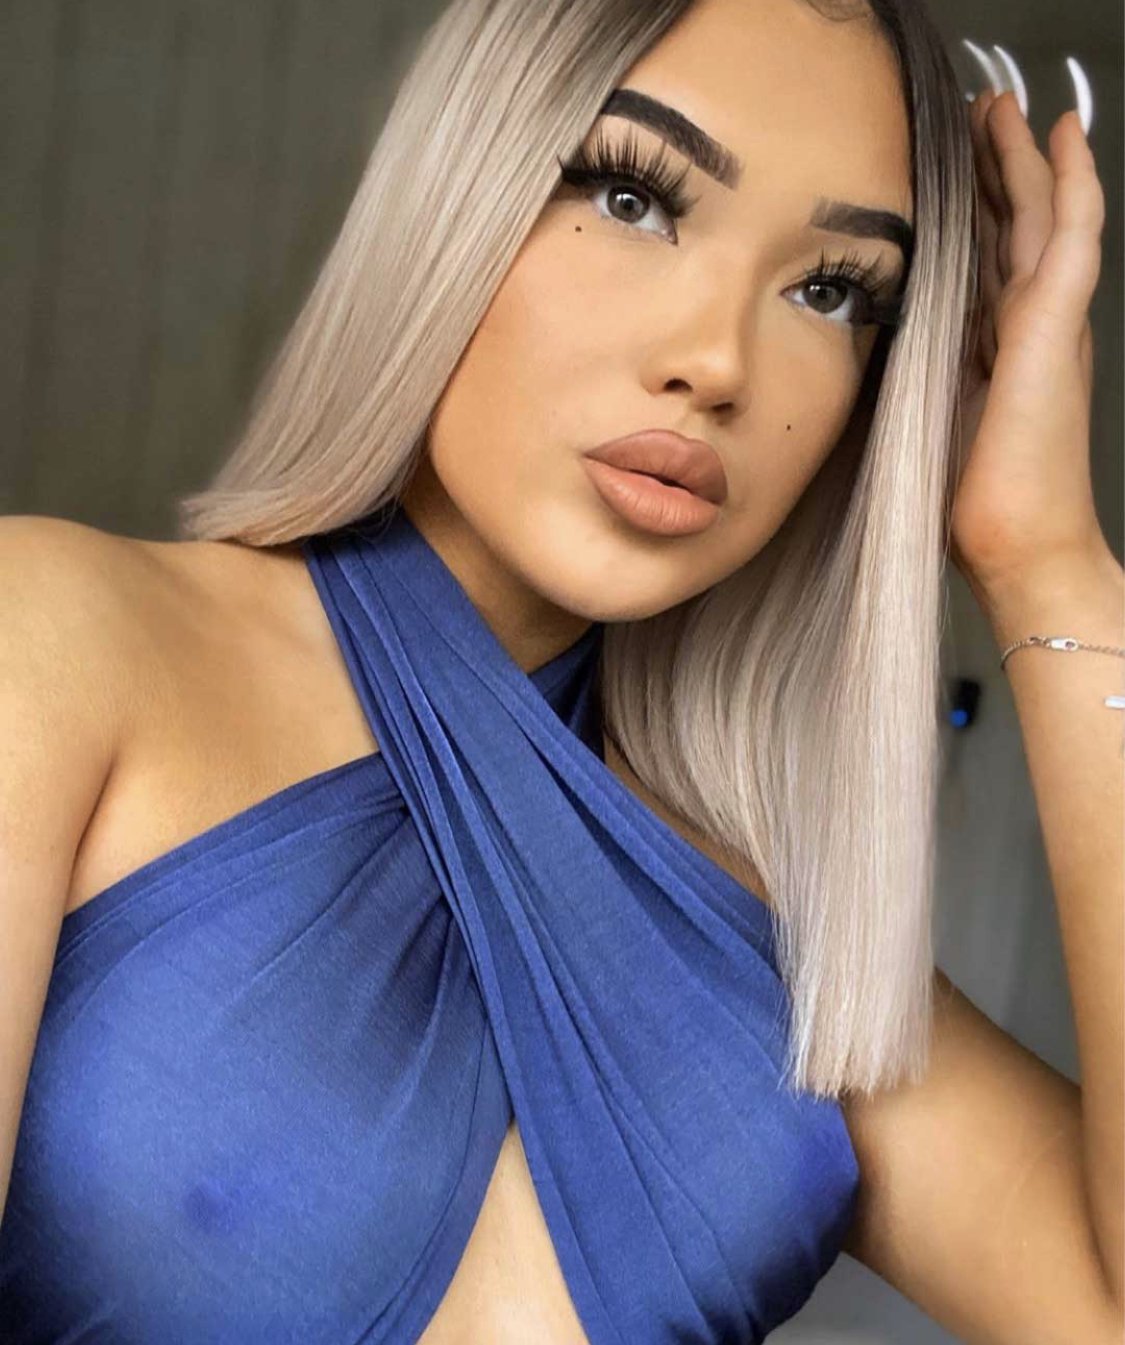 Blonde bob wig from pbeauty hair being worn by beautiful asian girl